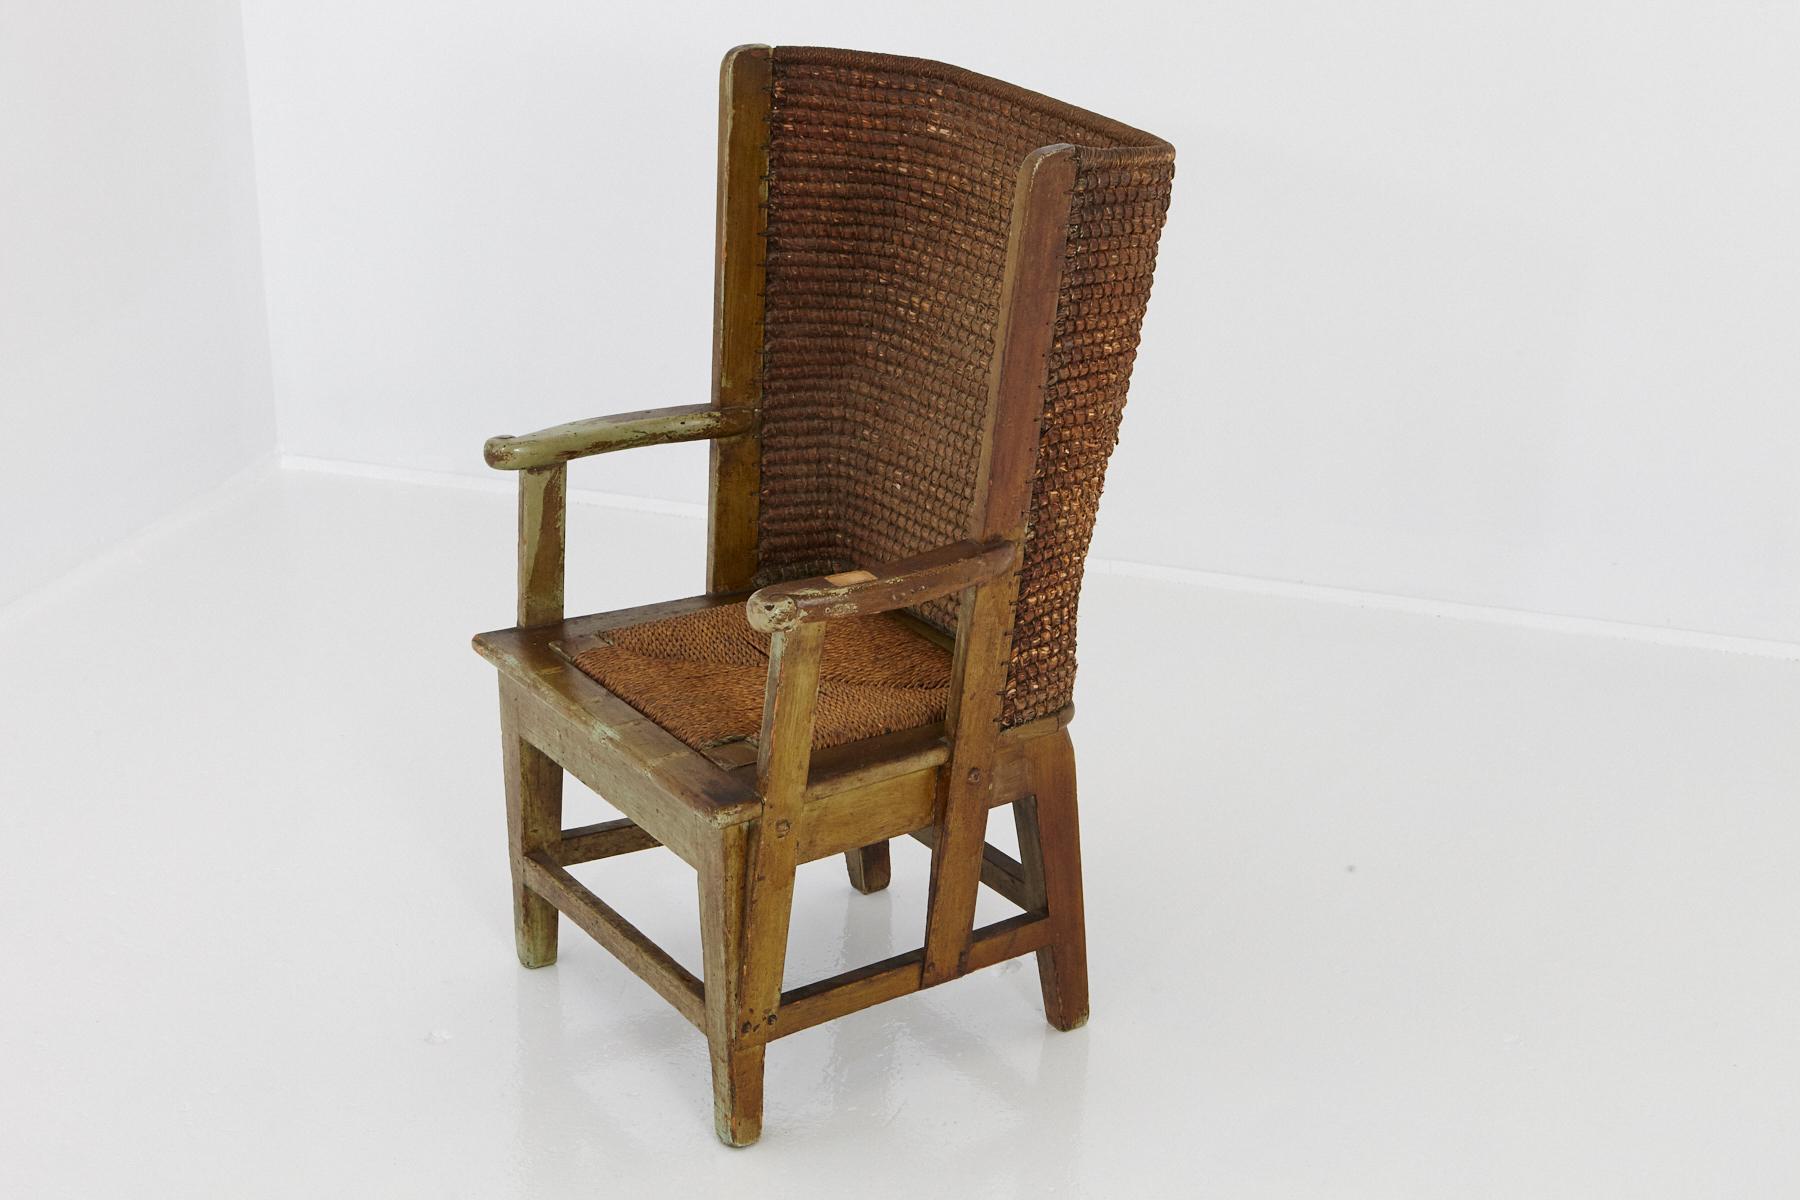 orkney chair for sale ebay